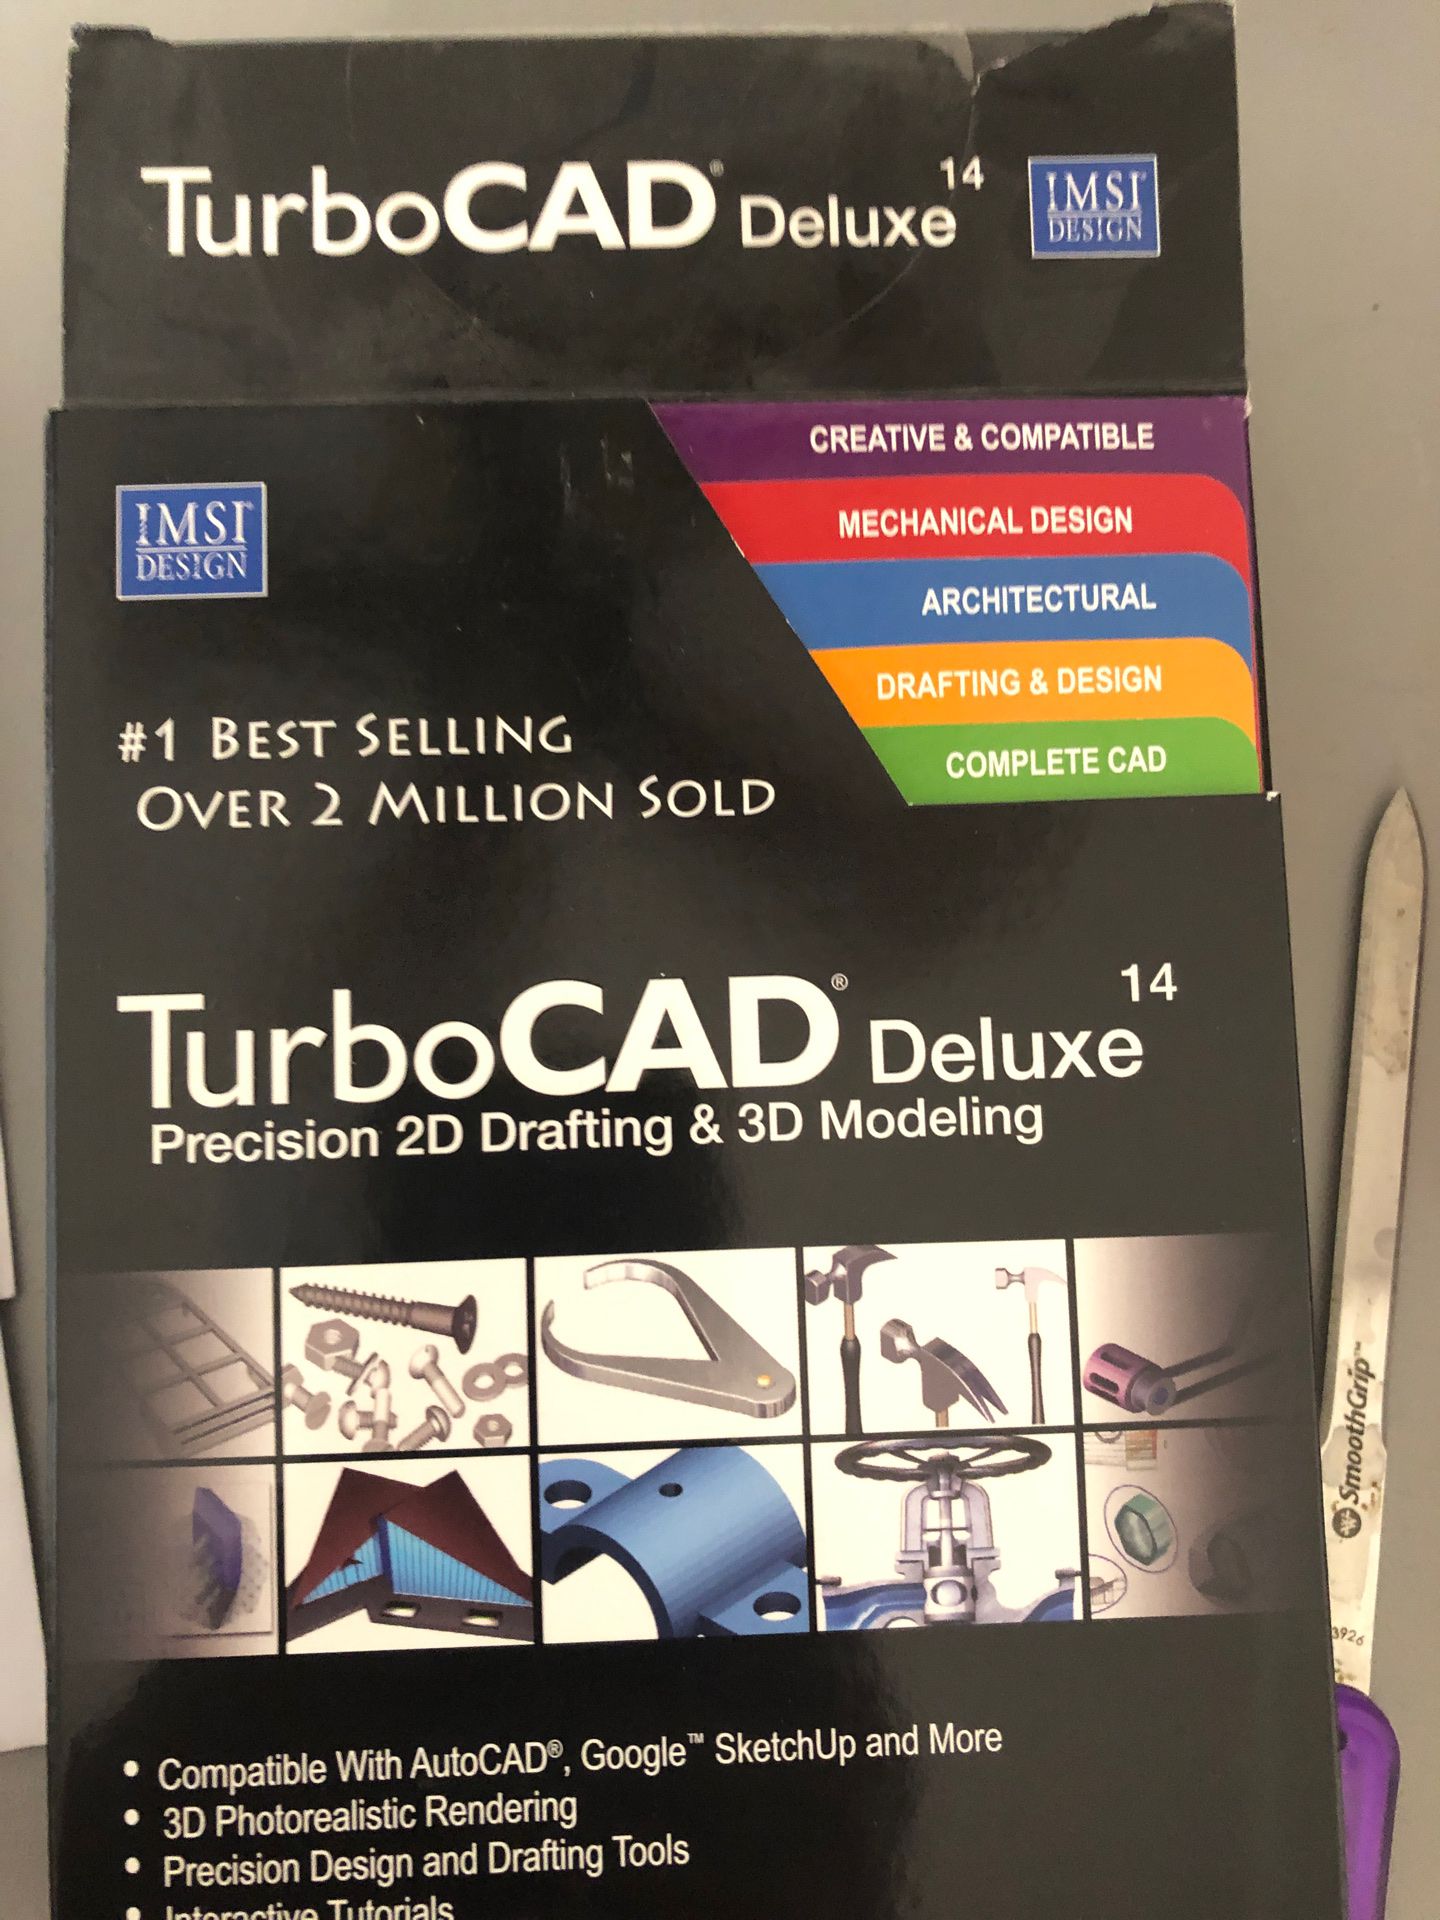 Turbo CIG deluxe 14 precision to D drafting in 3-D modeling